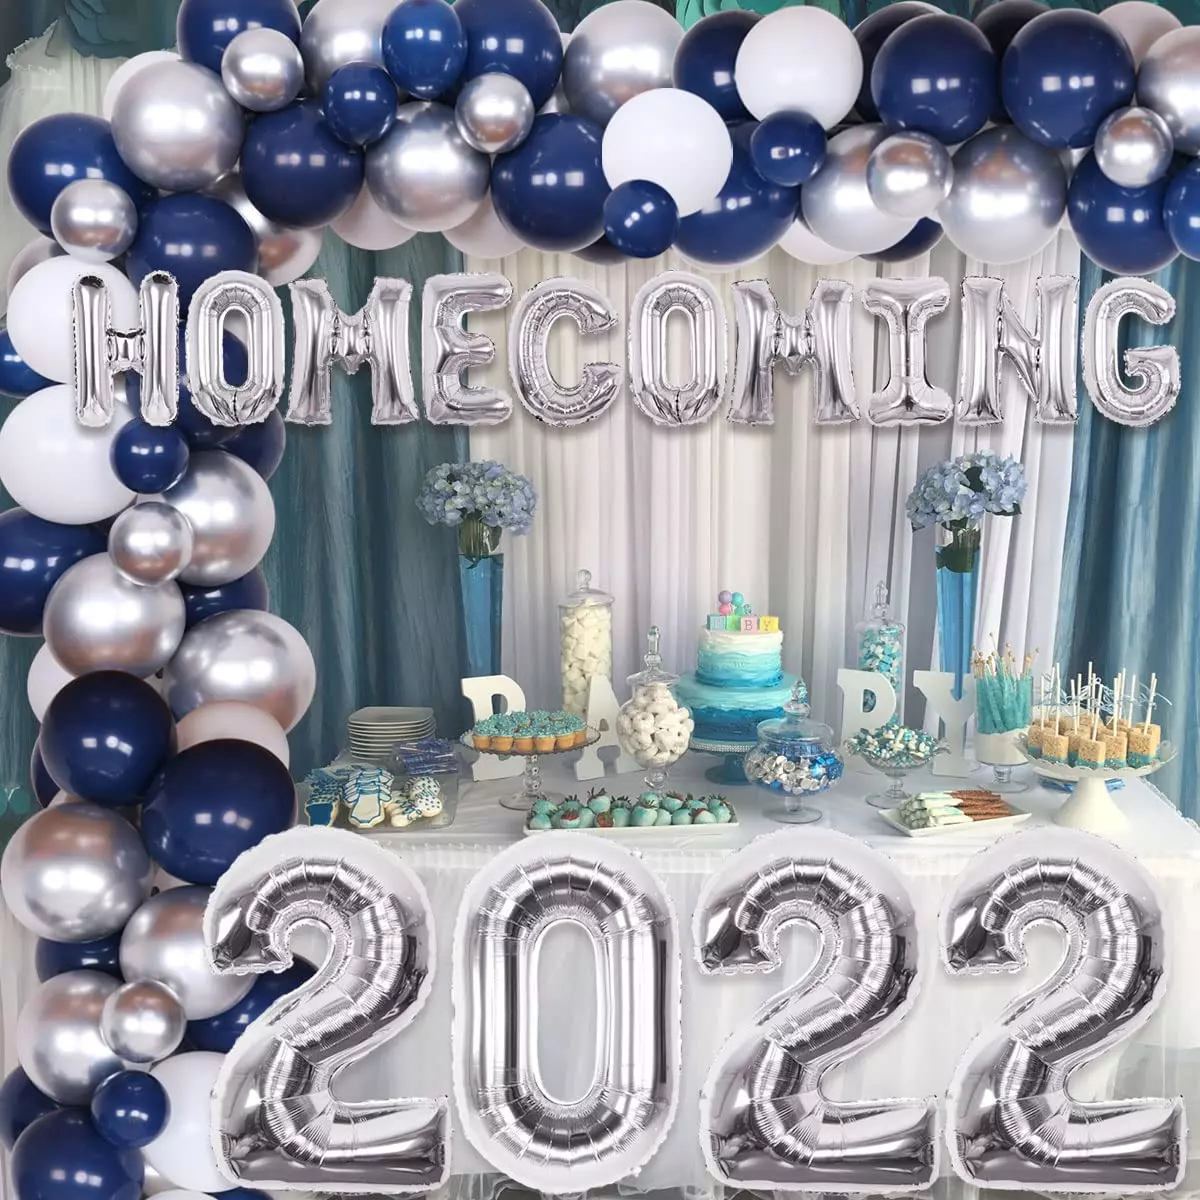 Balloon decoration for Homecoming